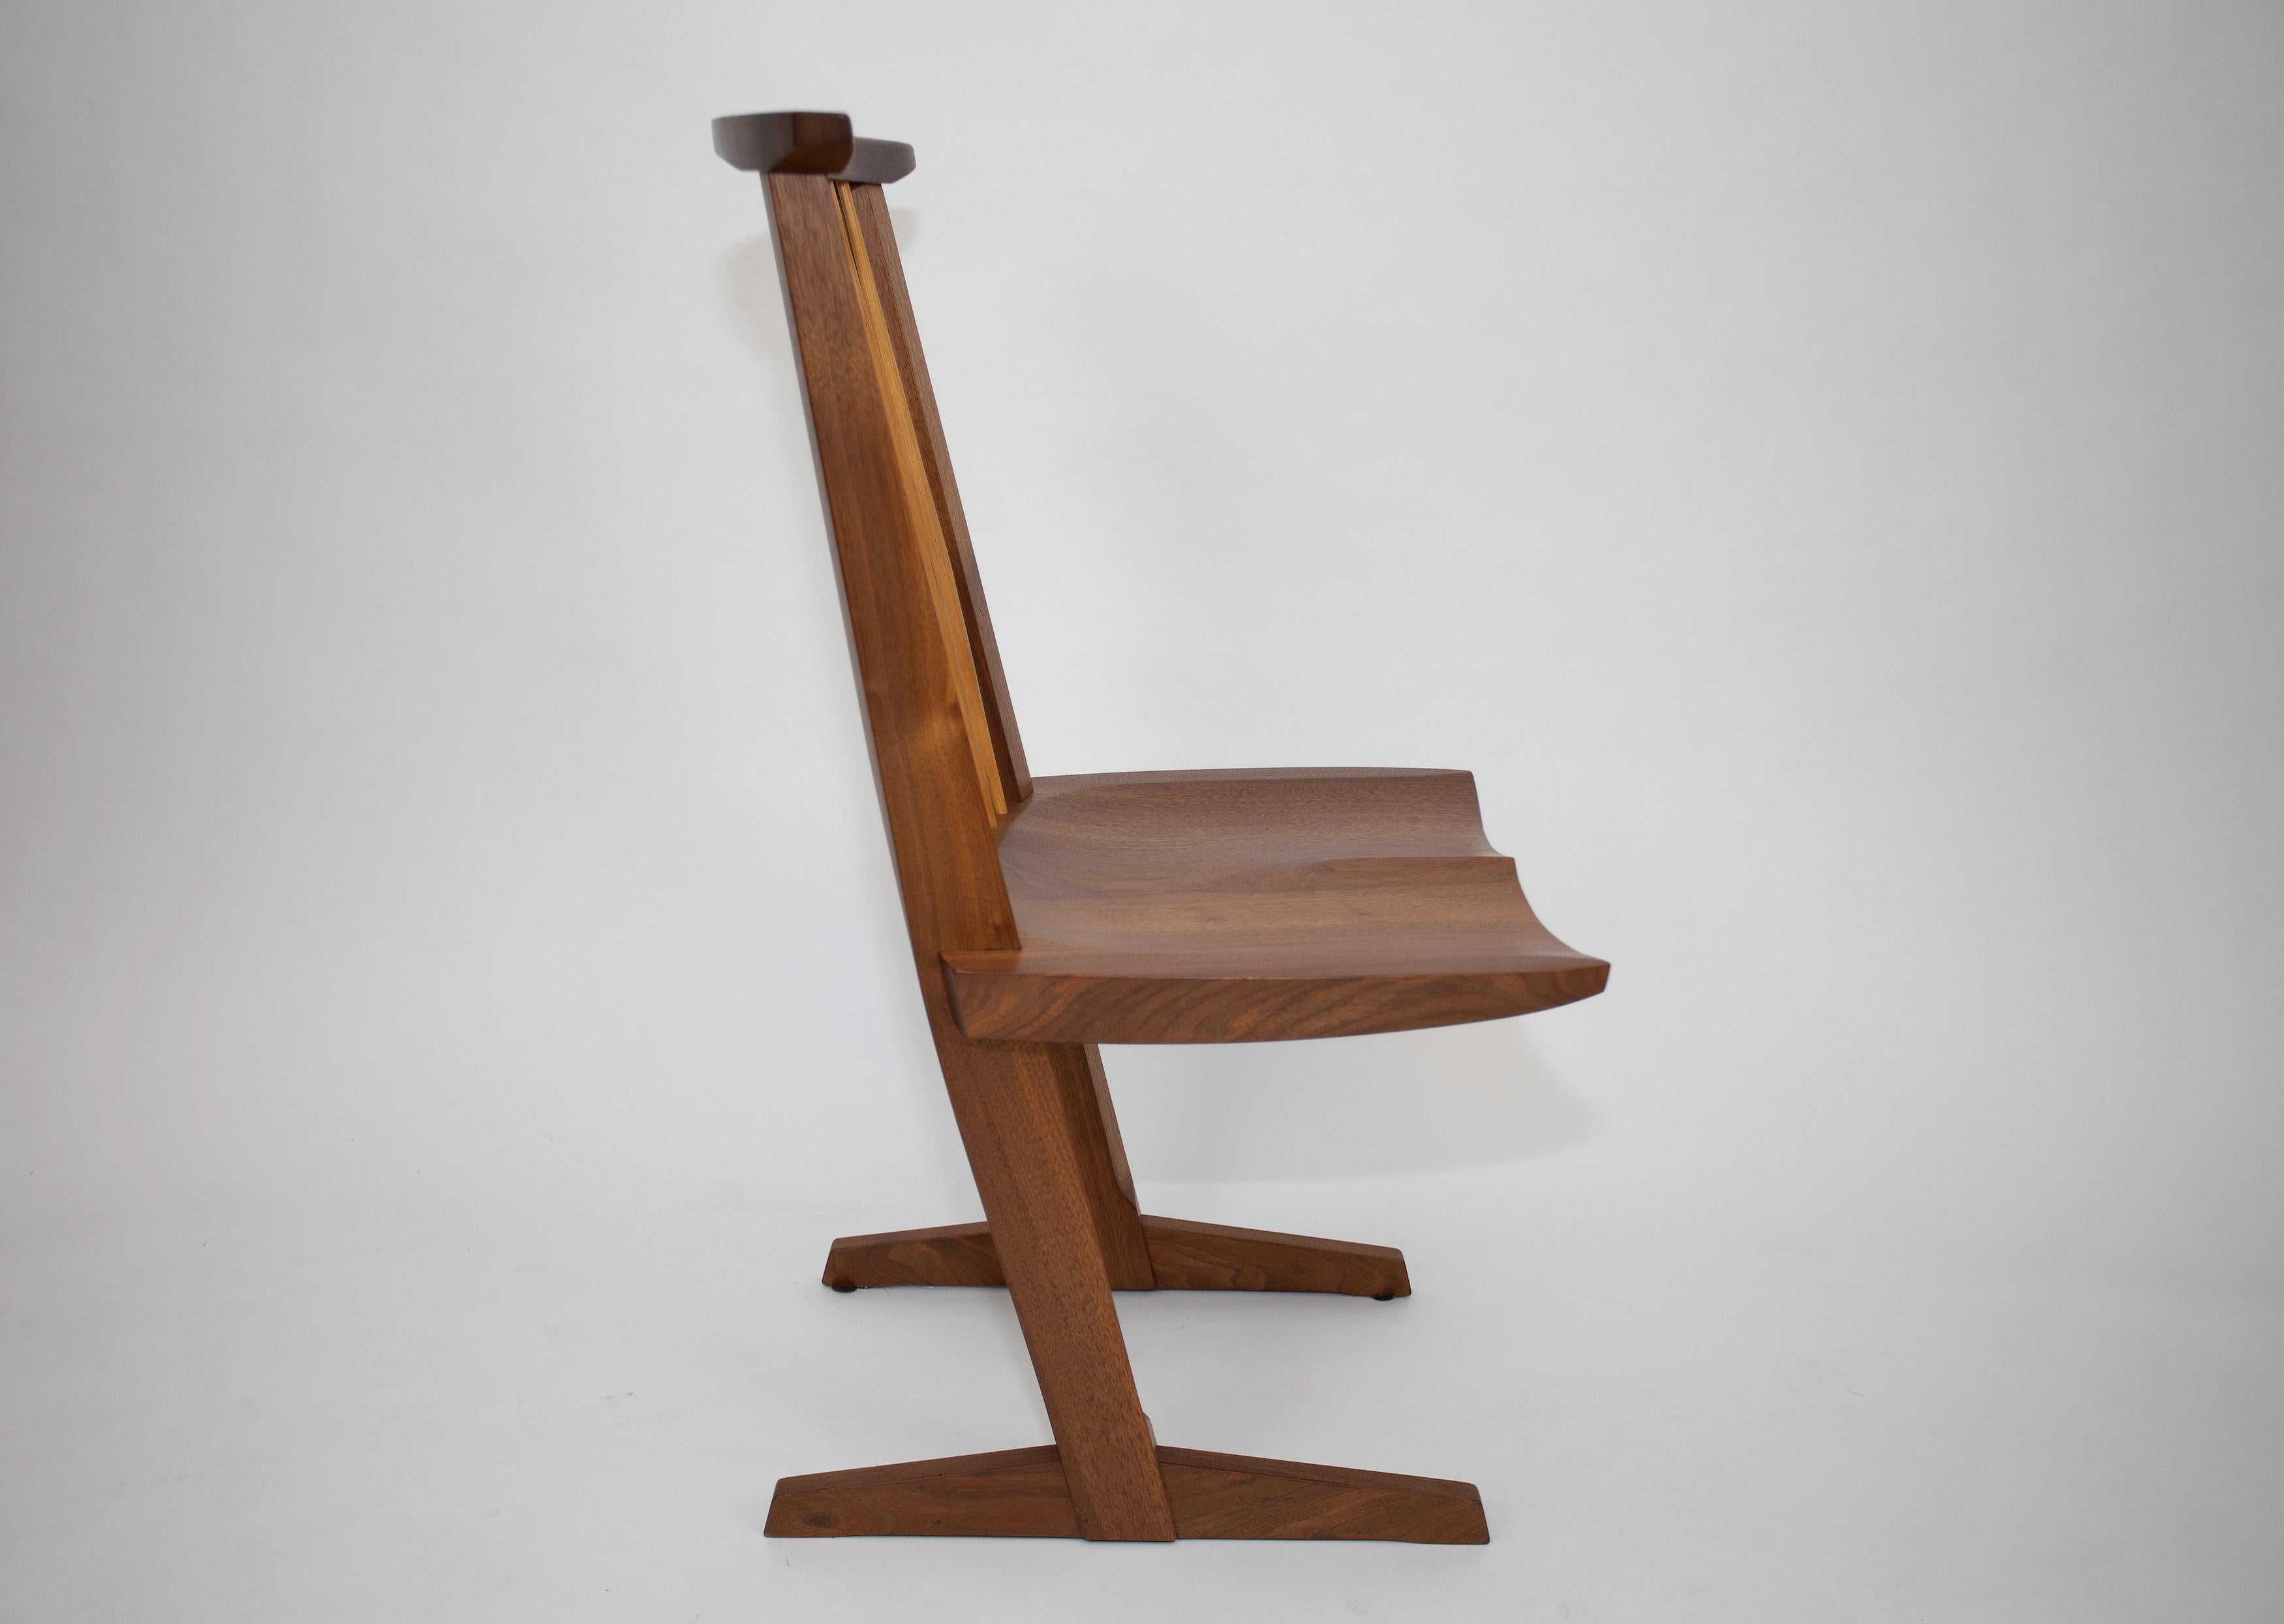 Nakashima studio Conoid Chair
Produced in 2000
Signed and dated
Clean original surface